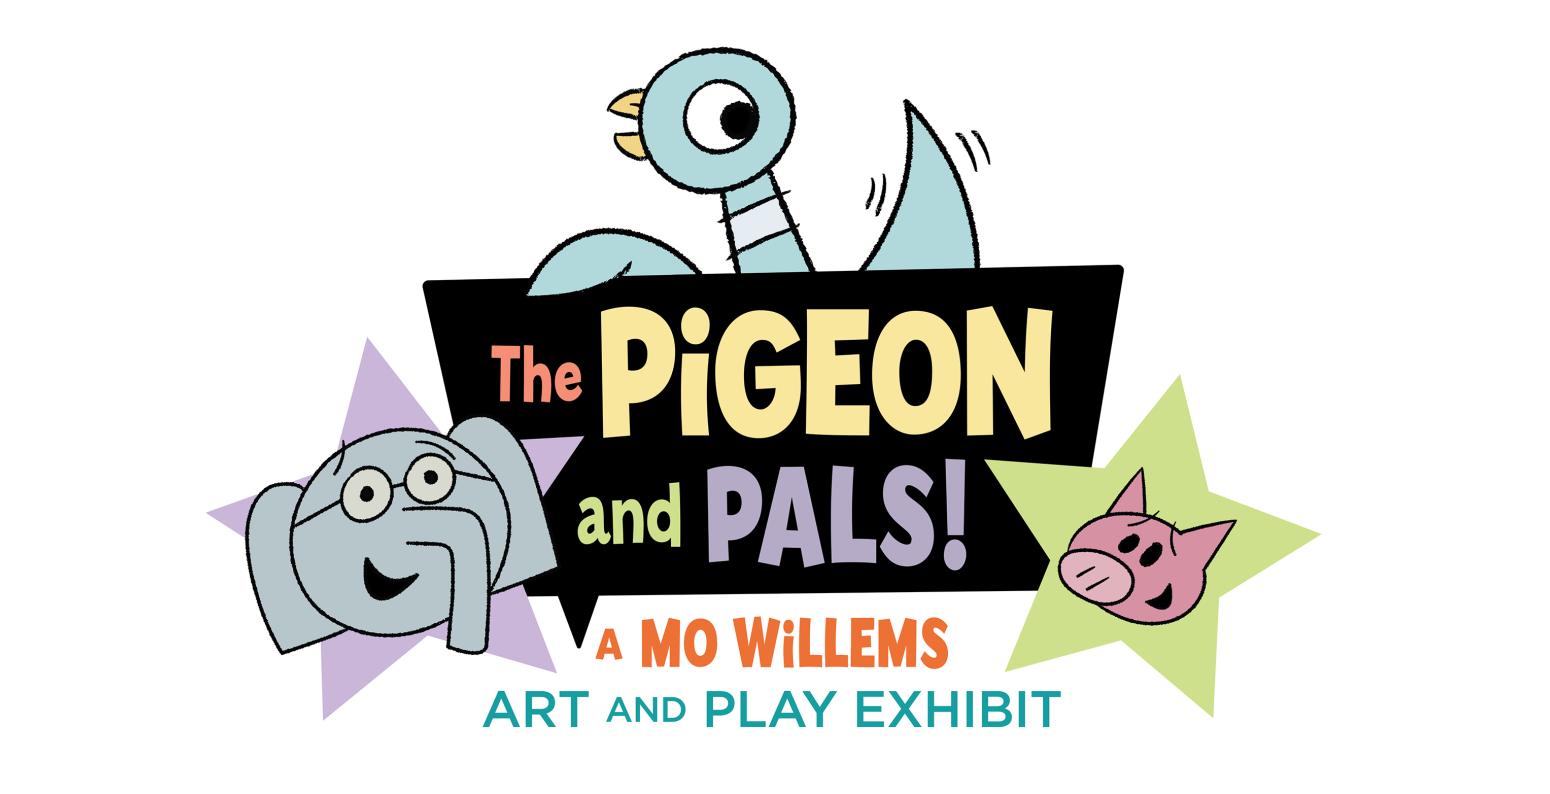 Exhibition logo featuring Elephant, Piggie, and the Pigeon